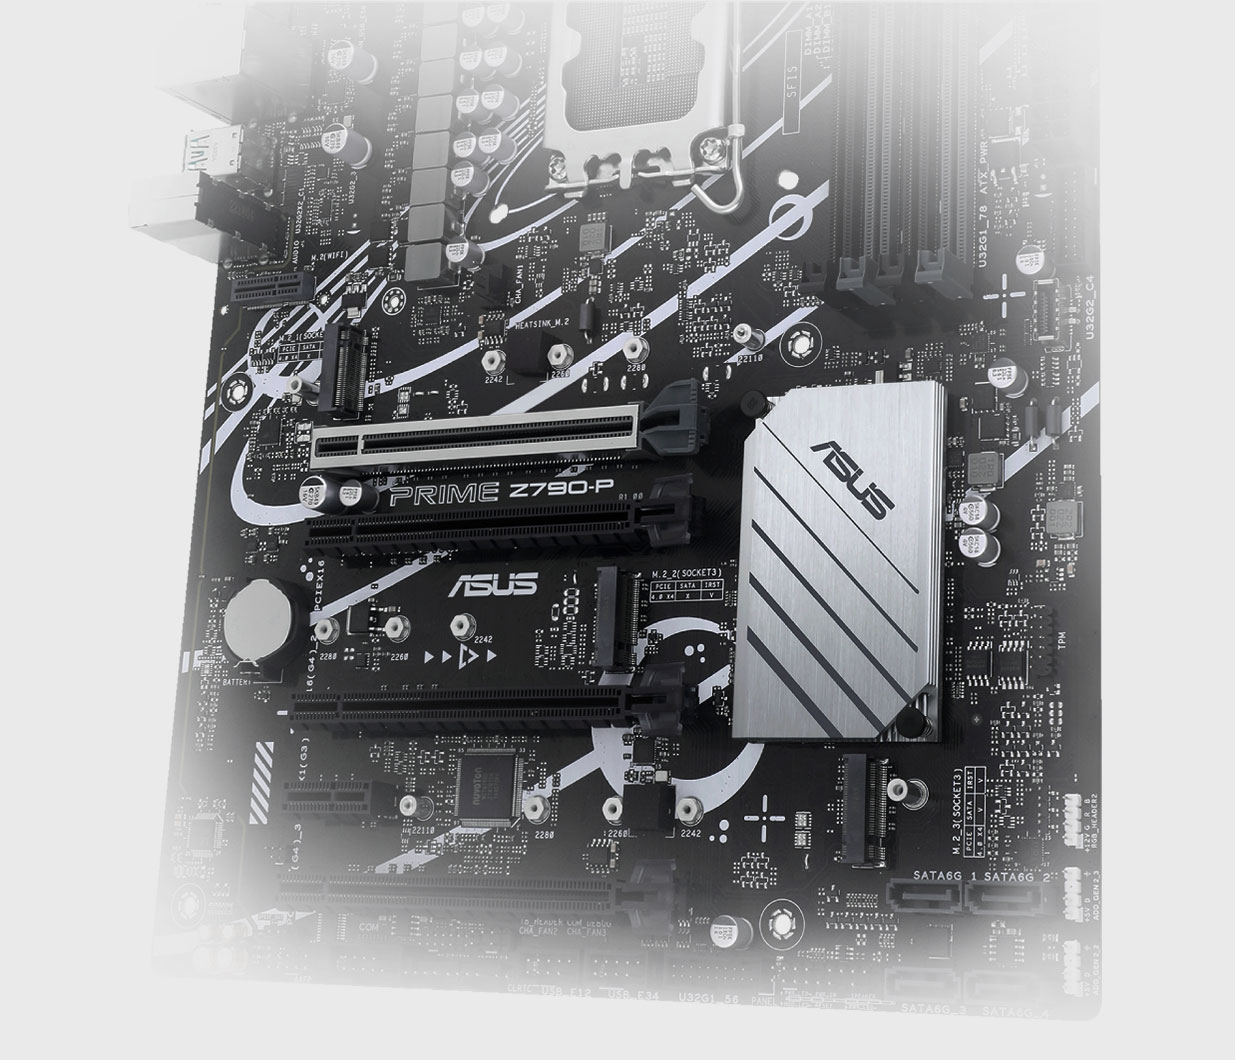 The PRIME Z790-P-CSM motherboard supports three M.2 slots.